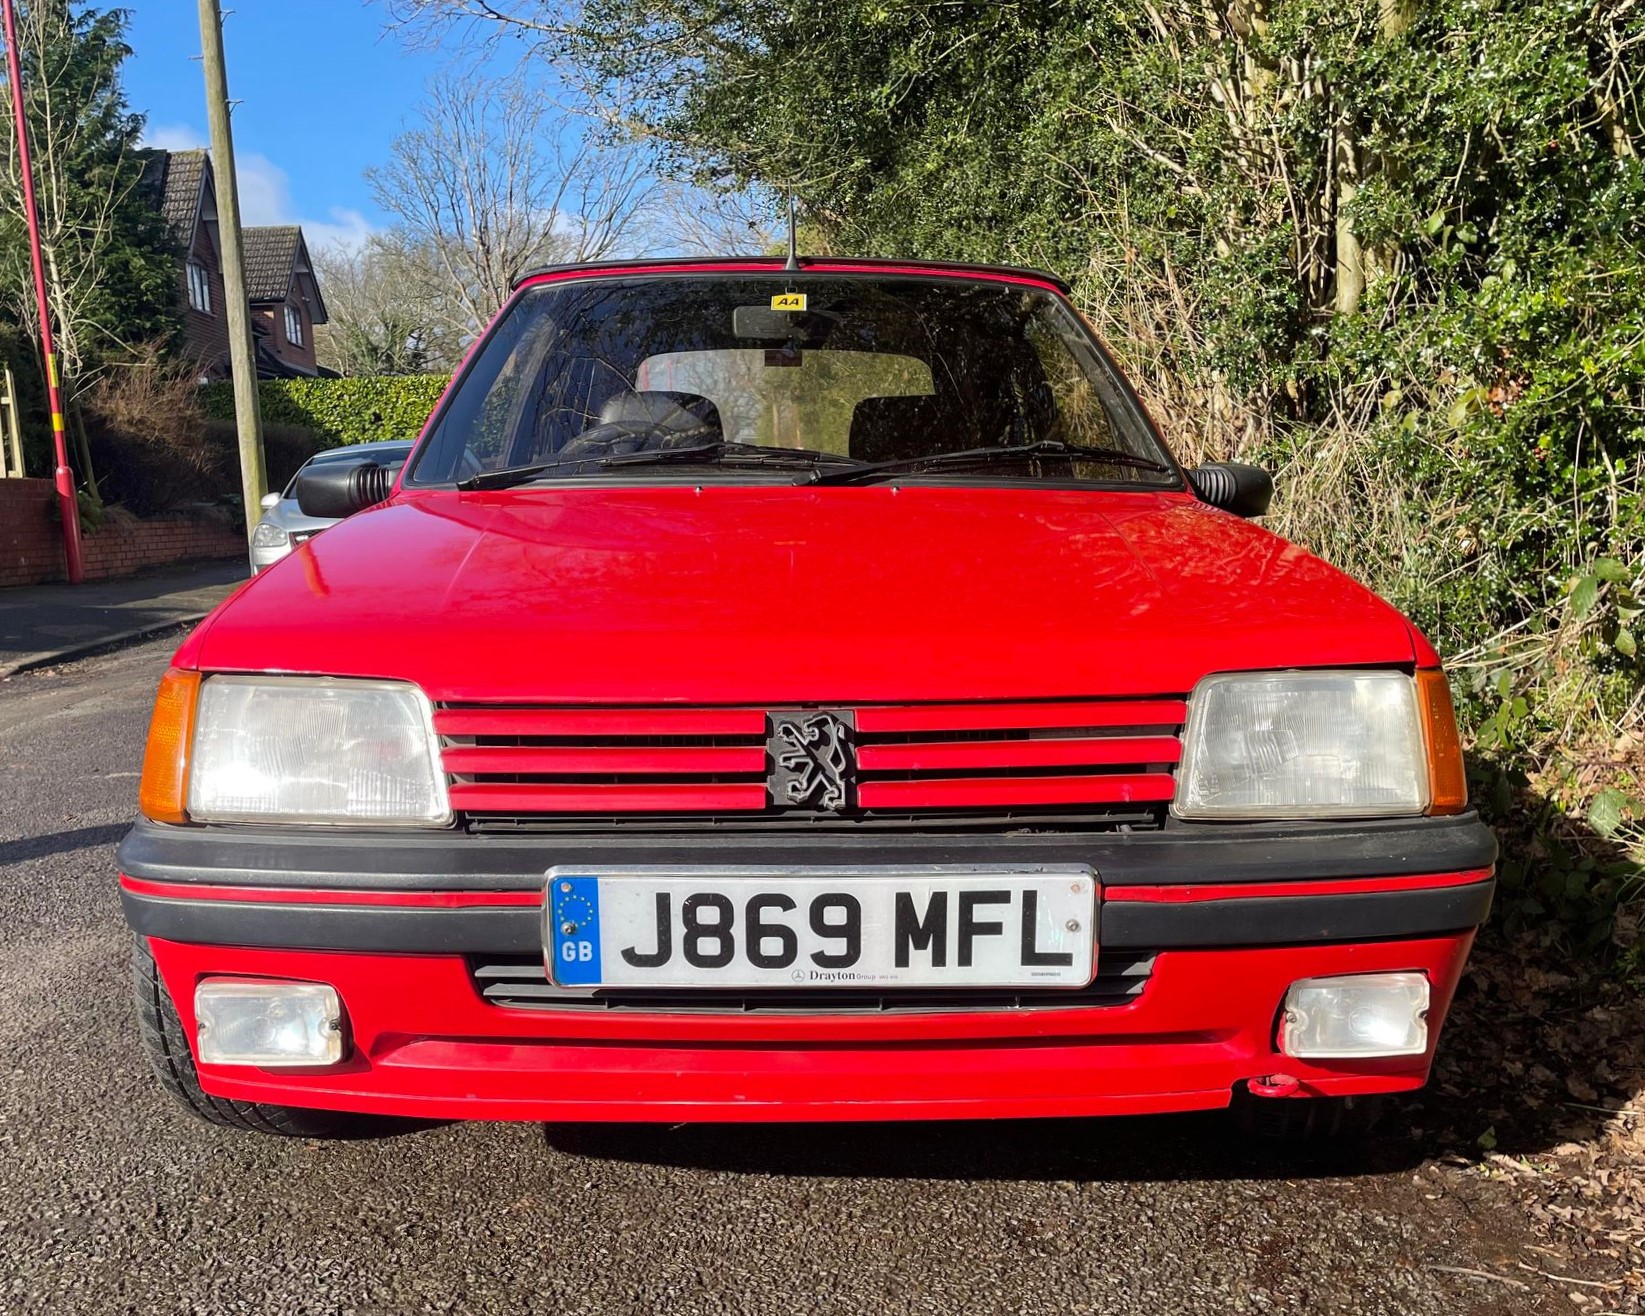 Peugeot 205 Cti 1.6 convertible - Mot'd 83,000 miles This stunning low mileage car has been - Image 5 of 18